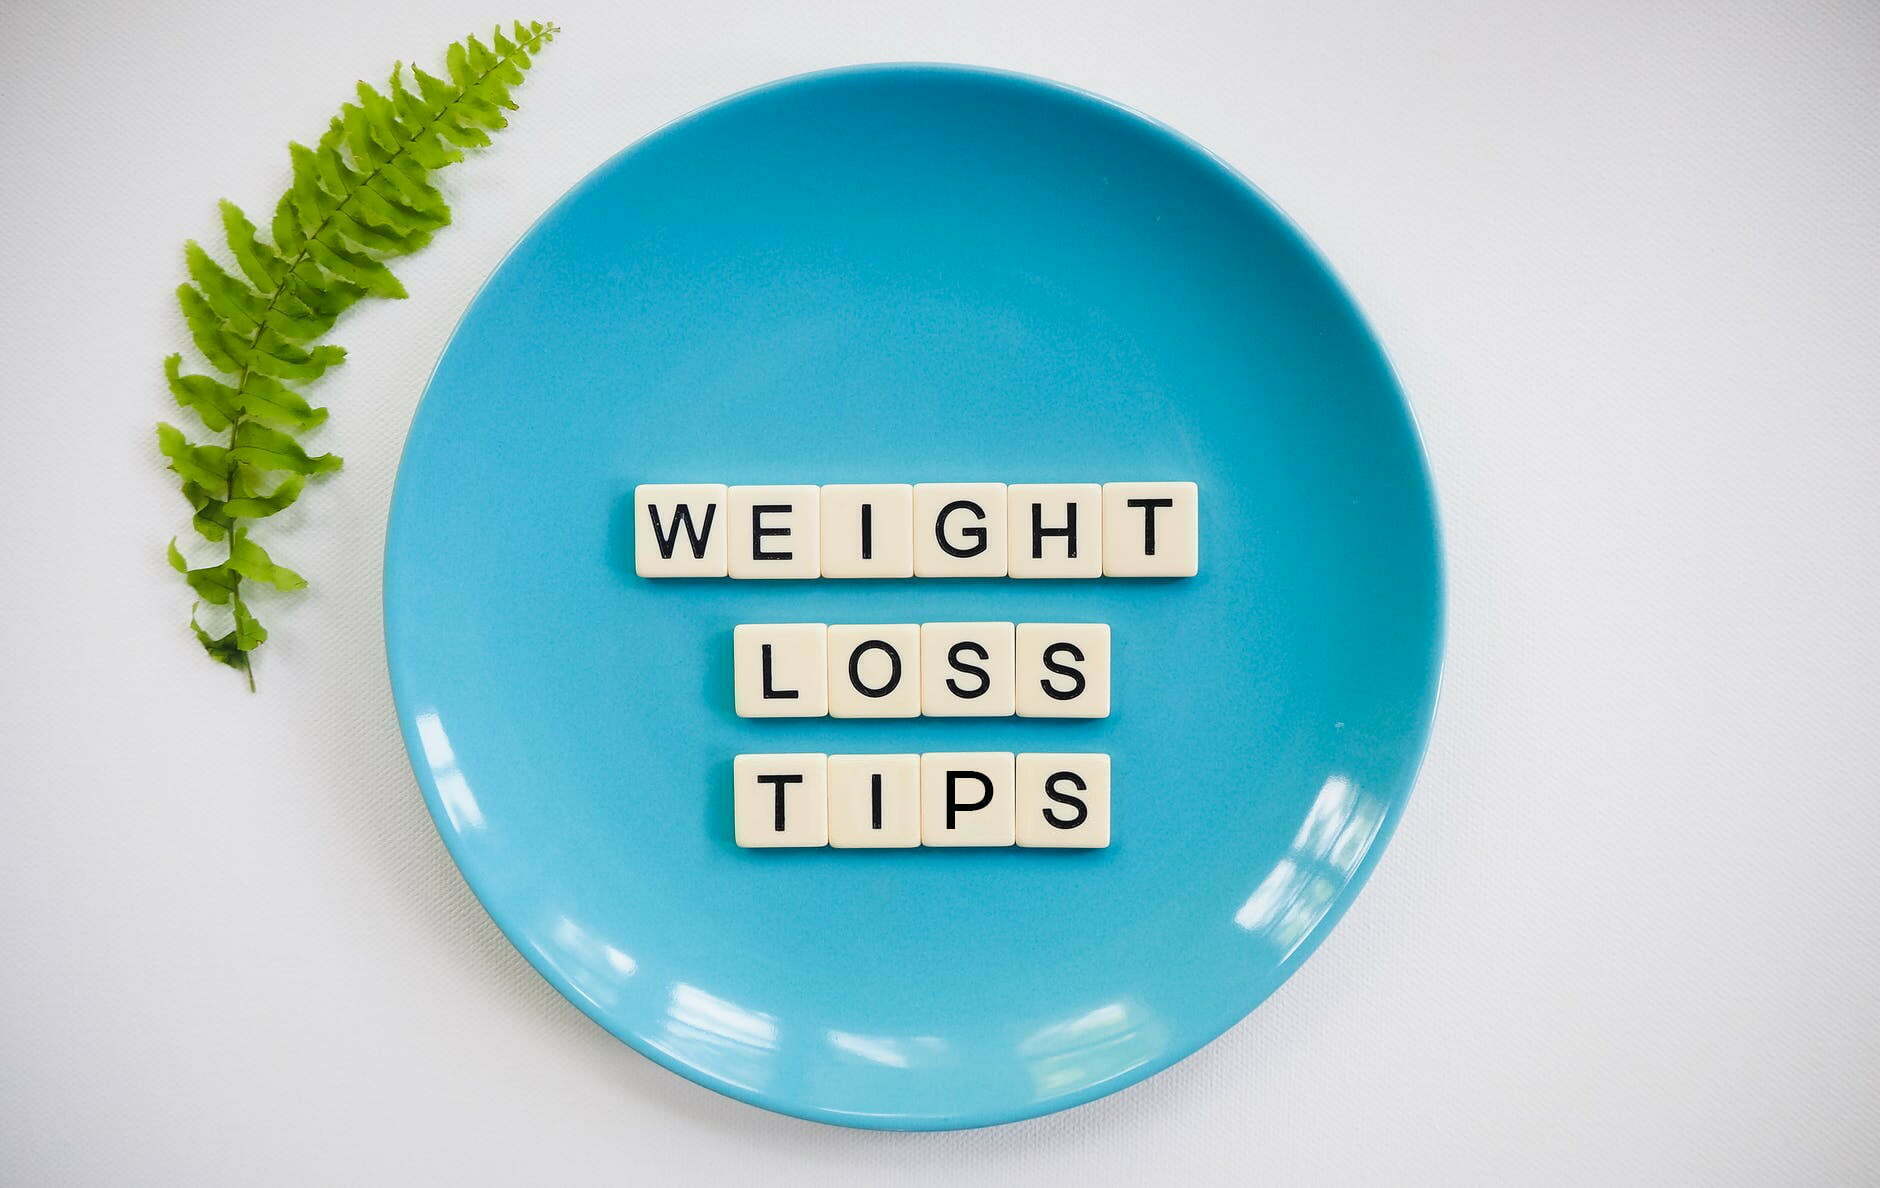 Weight loss Tips: What’s Best for You?